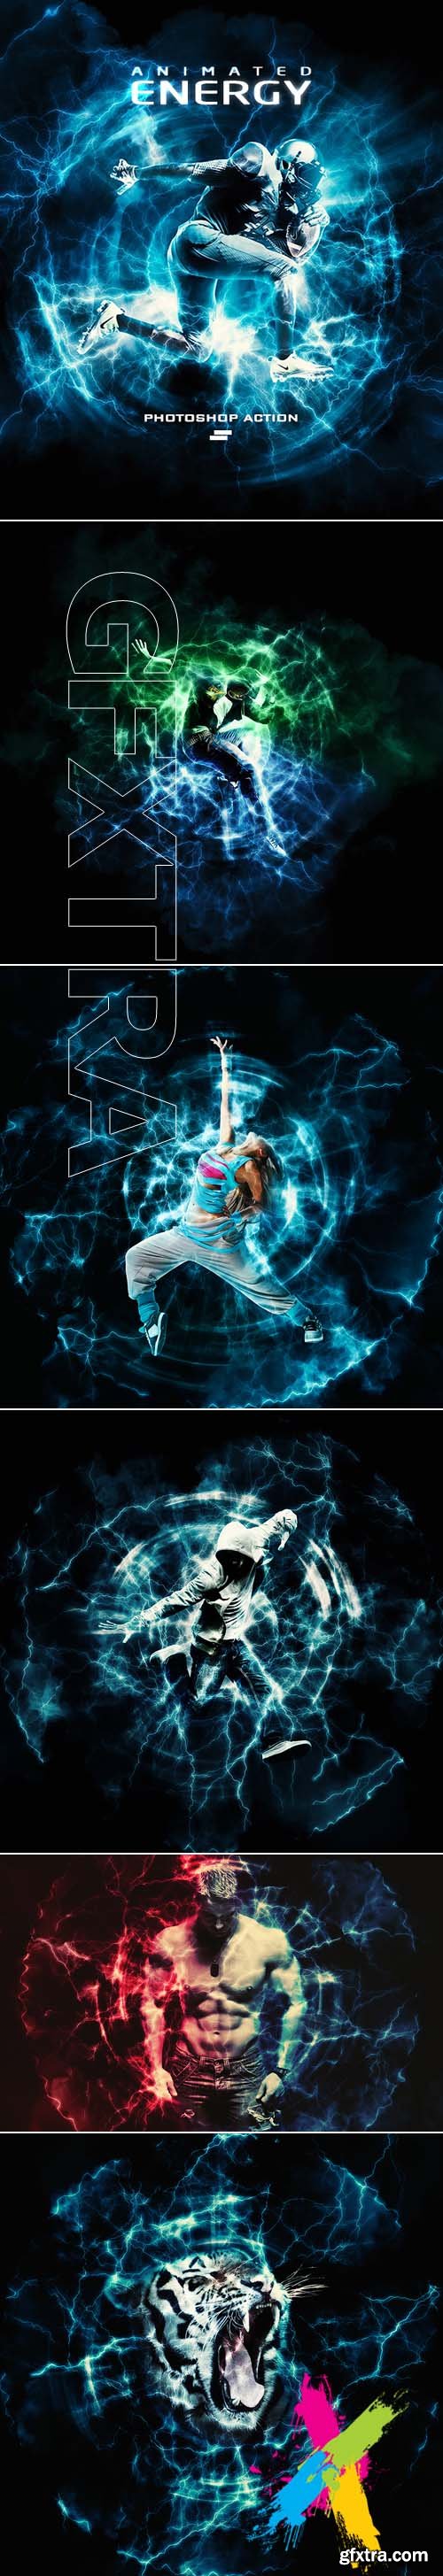 Graphicriver - Gif Animated Energy Light Effects Photoshop Action 20288988